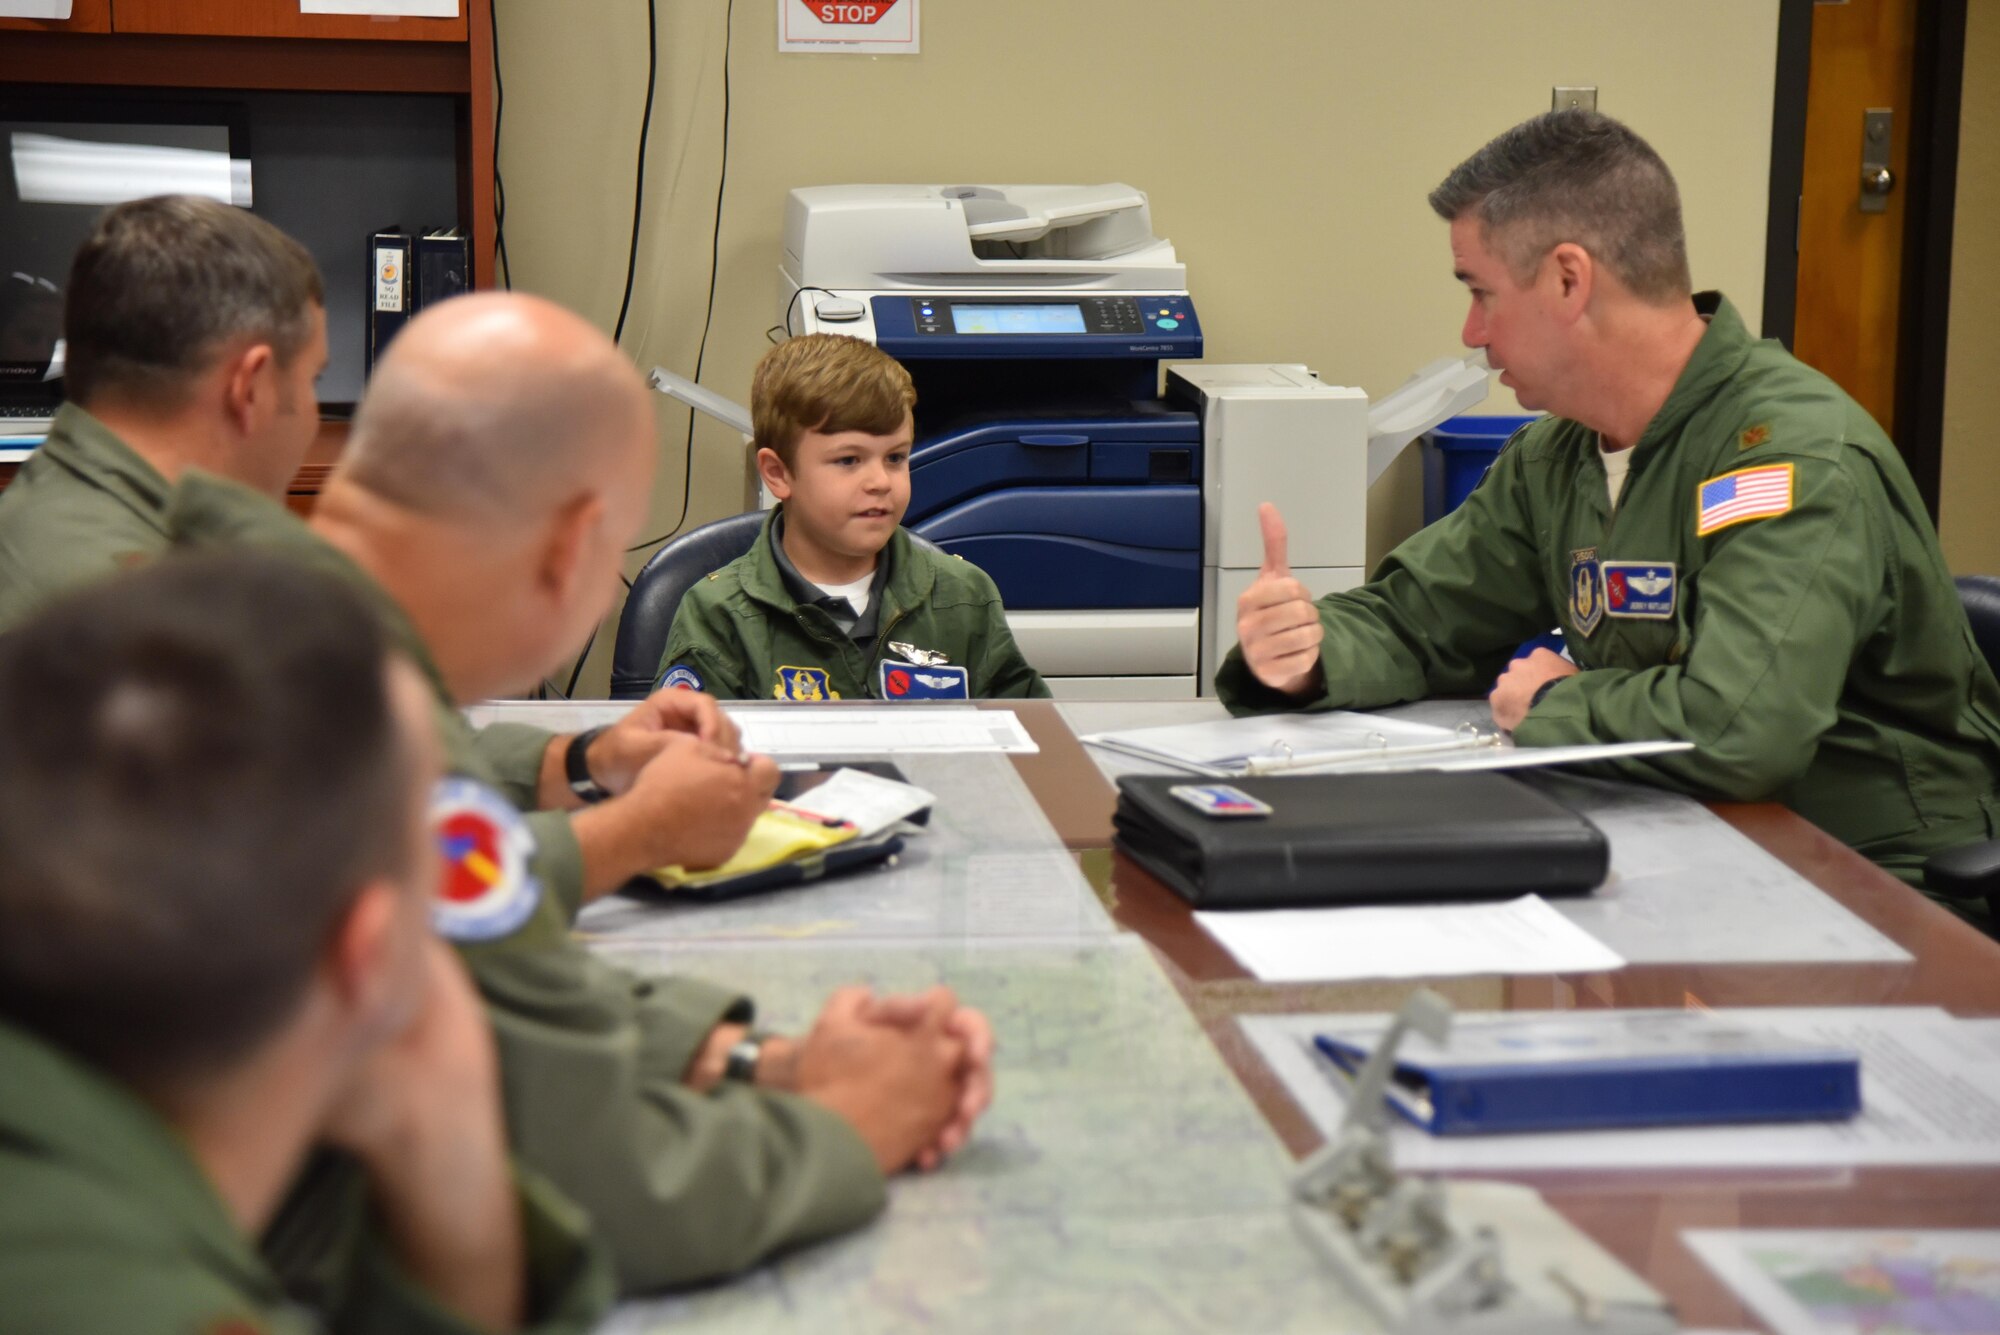 Jon Bryant “JB” Orso of the Mobile, Alabama, area became the 403rd Wing’s first Pilot for a Day at Keesler Air Force Base, Mississippi, April 26, 2016. Orso sits in on his first mission brief before his taxi ride in a WC-130J Super Hercules aircraft. The purpose of the Pilot for a Day program is to reach out to the community by providing activities to children who live with a chronic or life-threatening disease or illness. Orso is in remission after receiving treatment for Acute Lymphoblastic Leukemia. (U.S. Air Force photo/Maj. Marnee A.C. Losurdo)